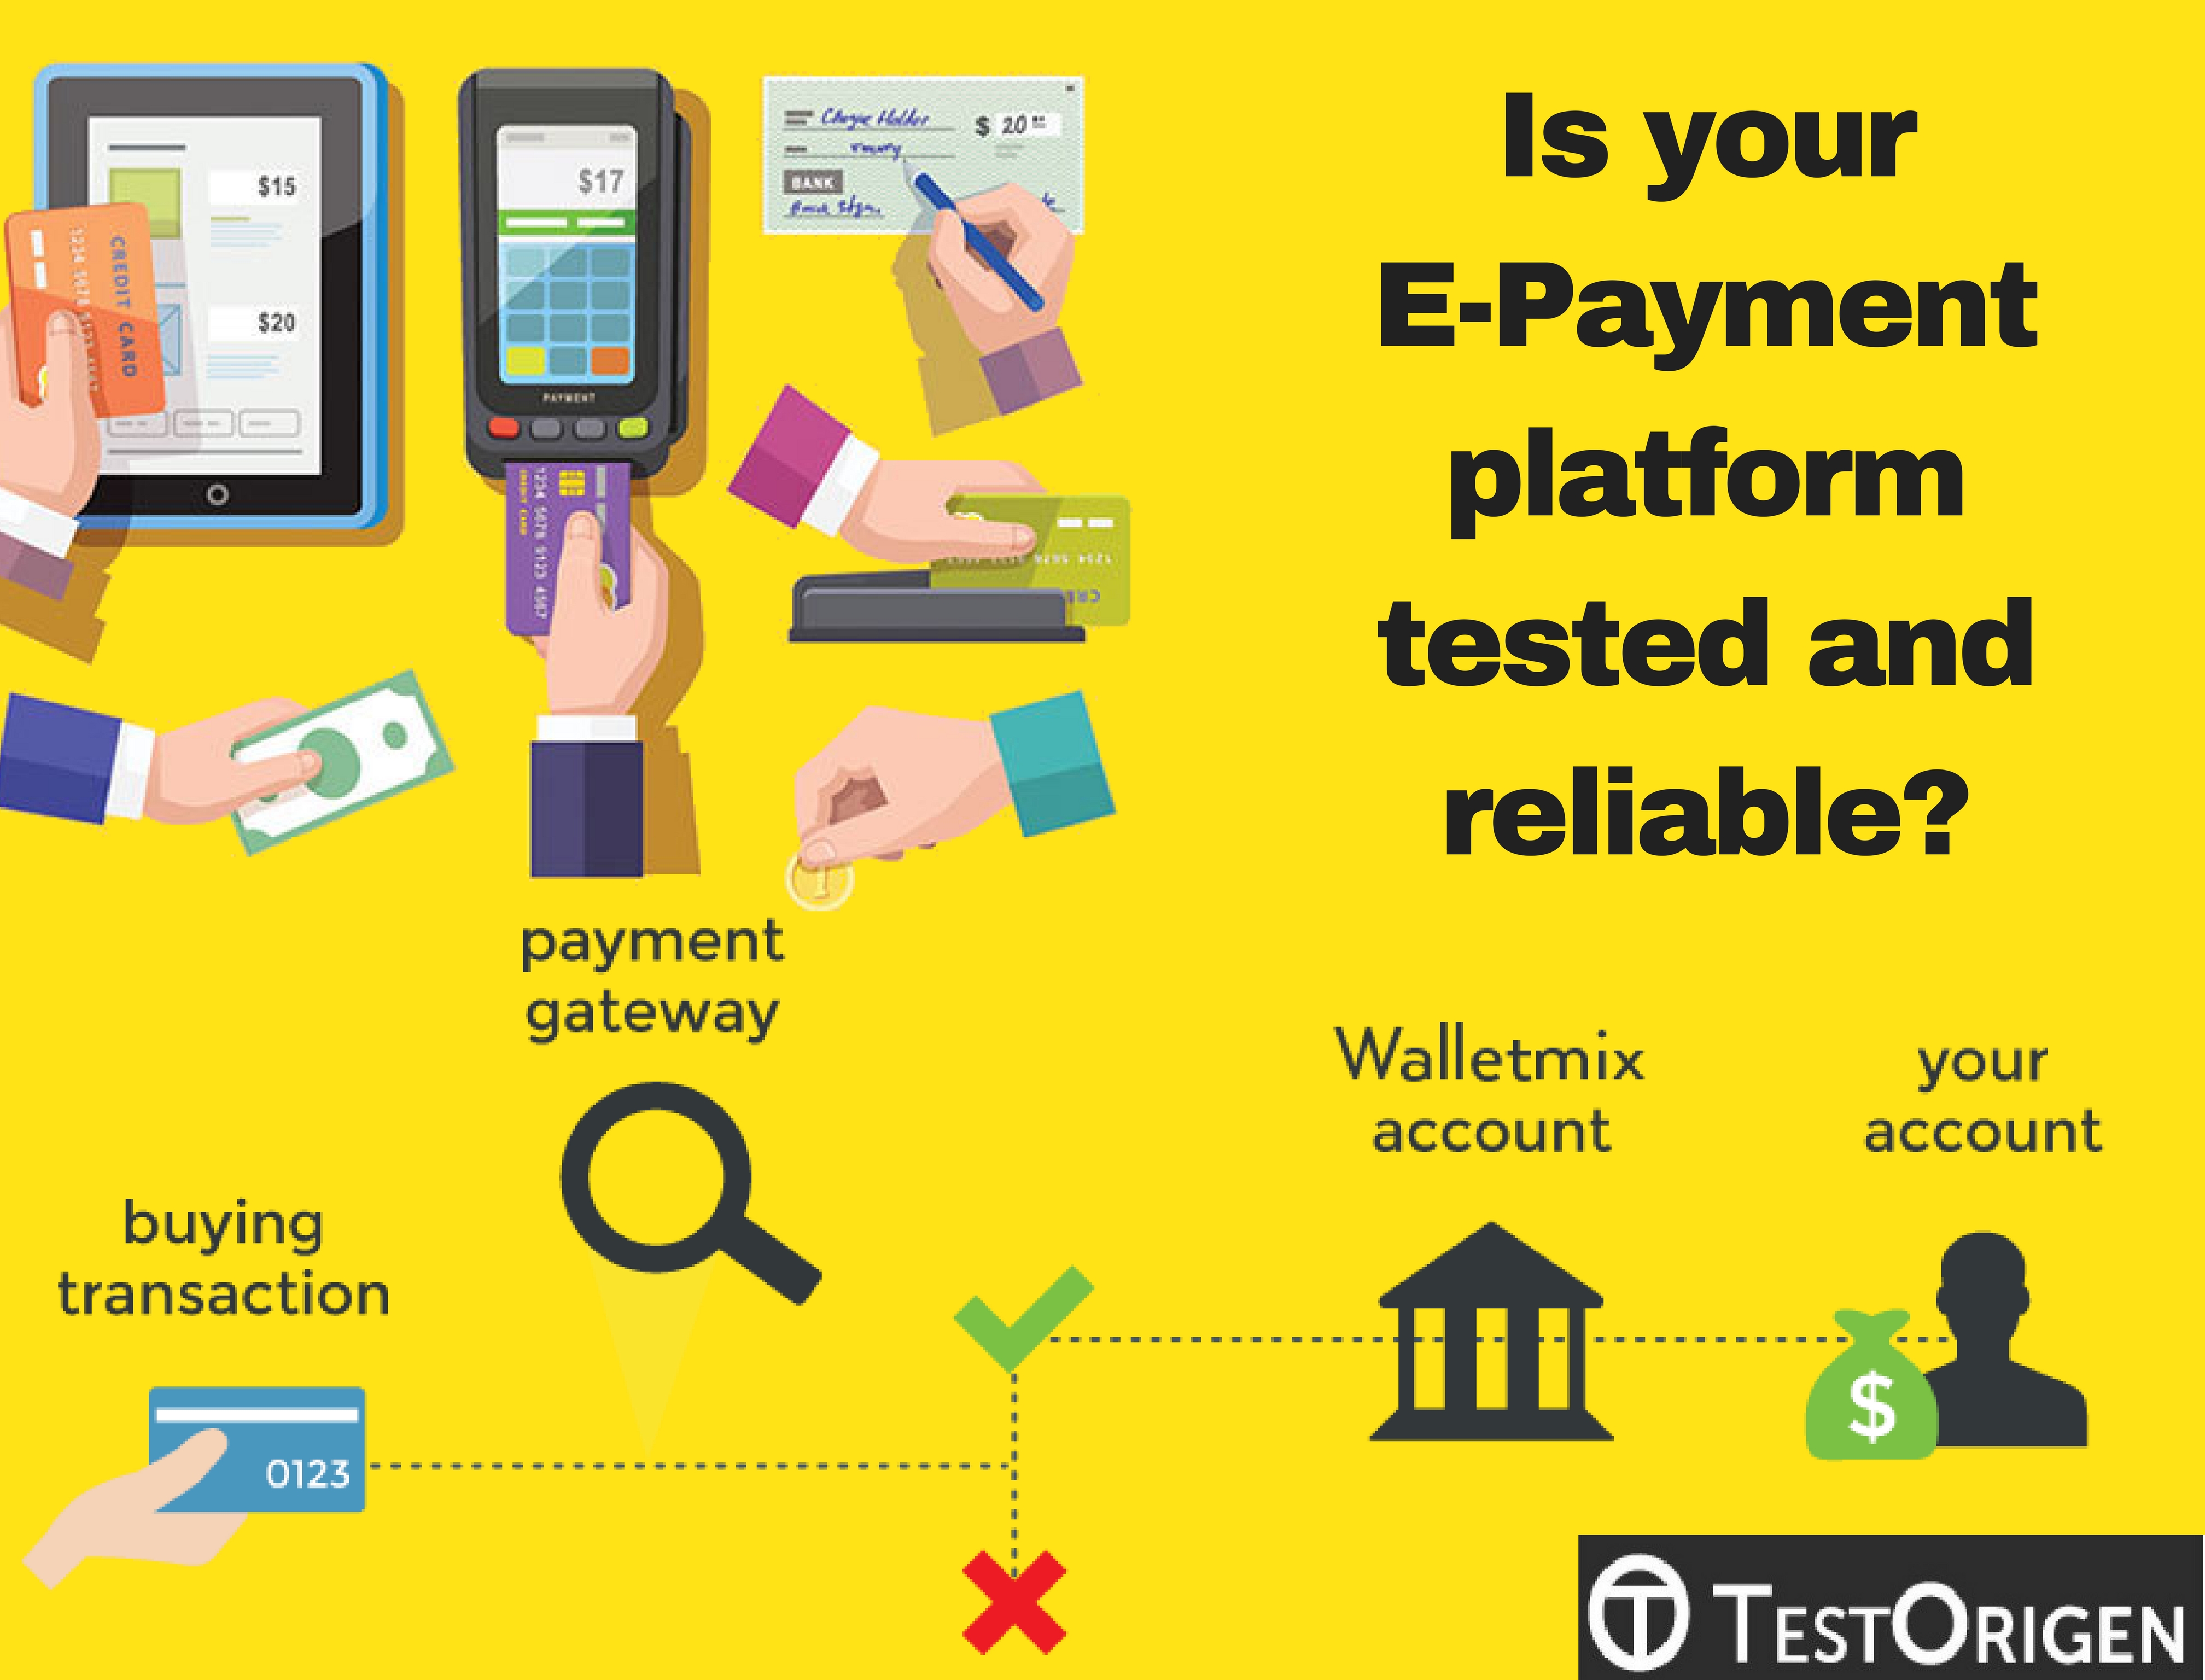 Is your E-Payment platform tested and reliable?